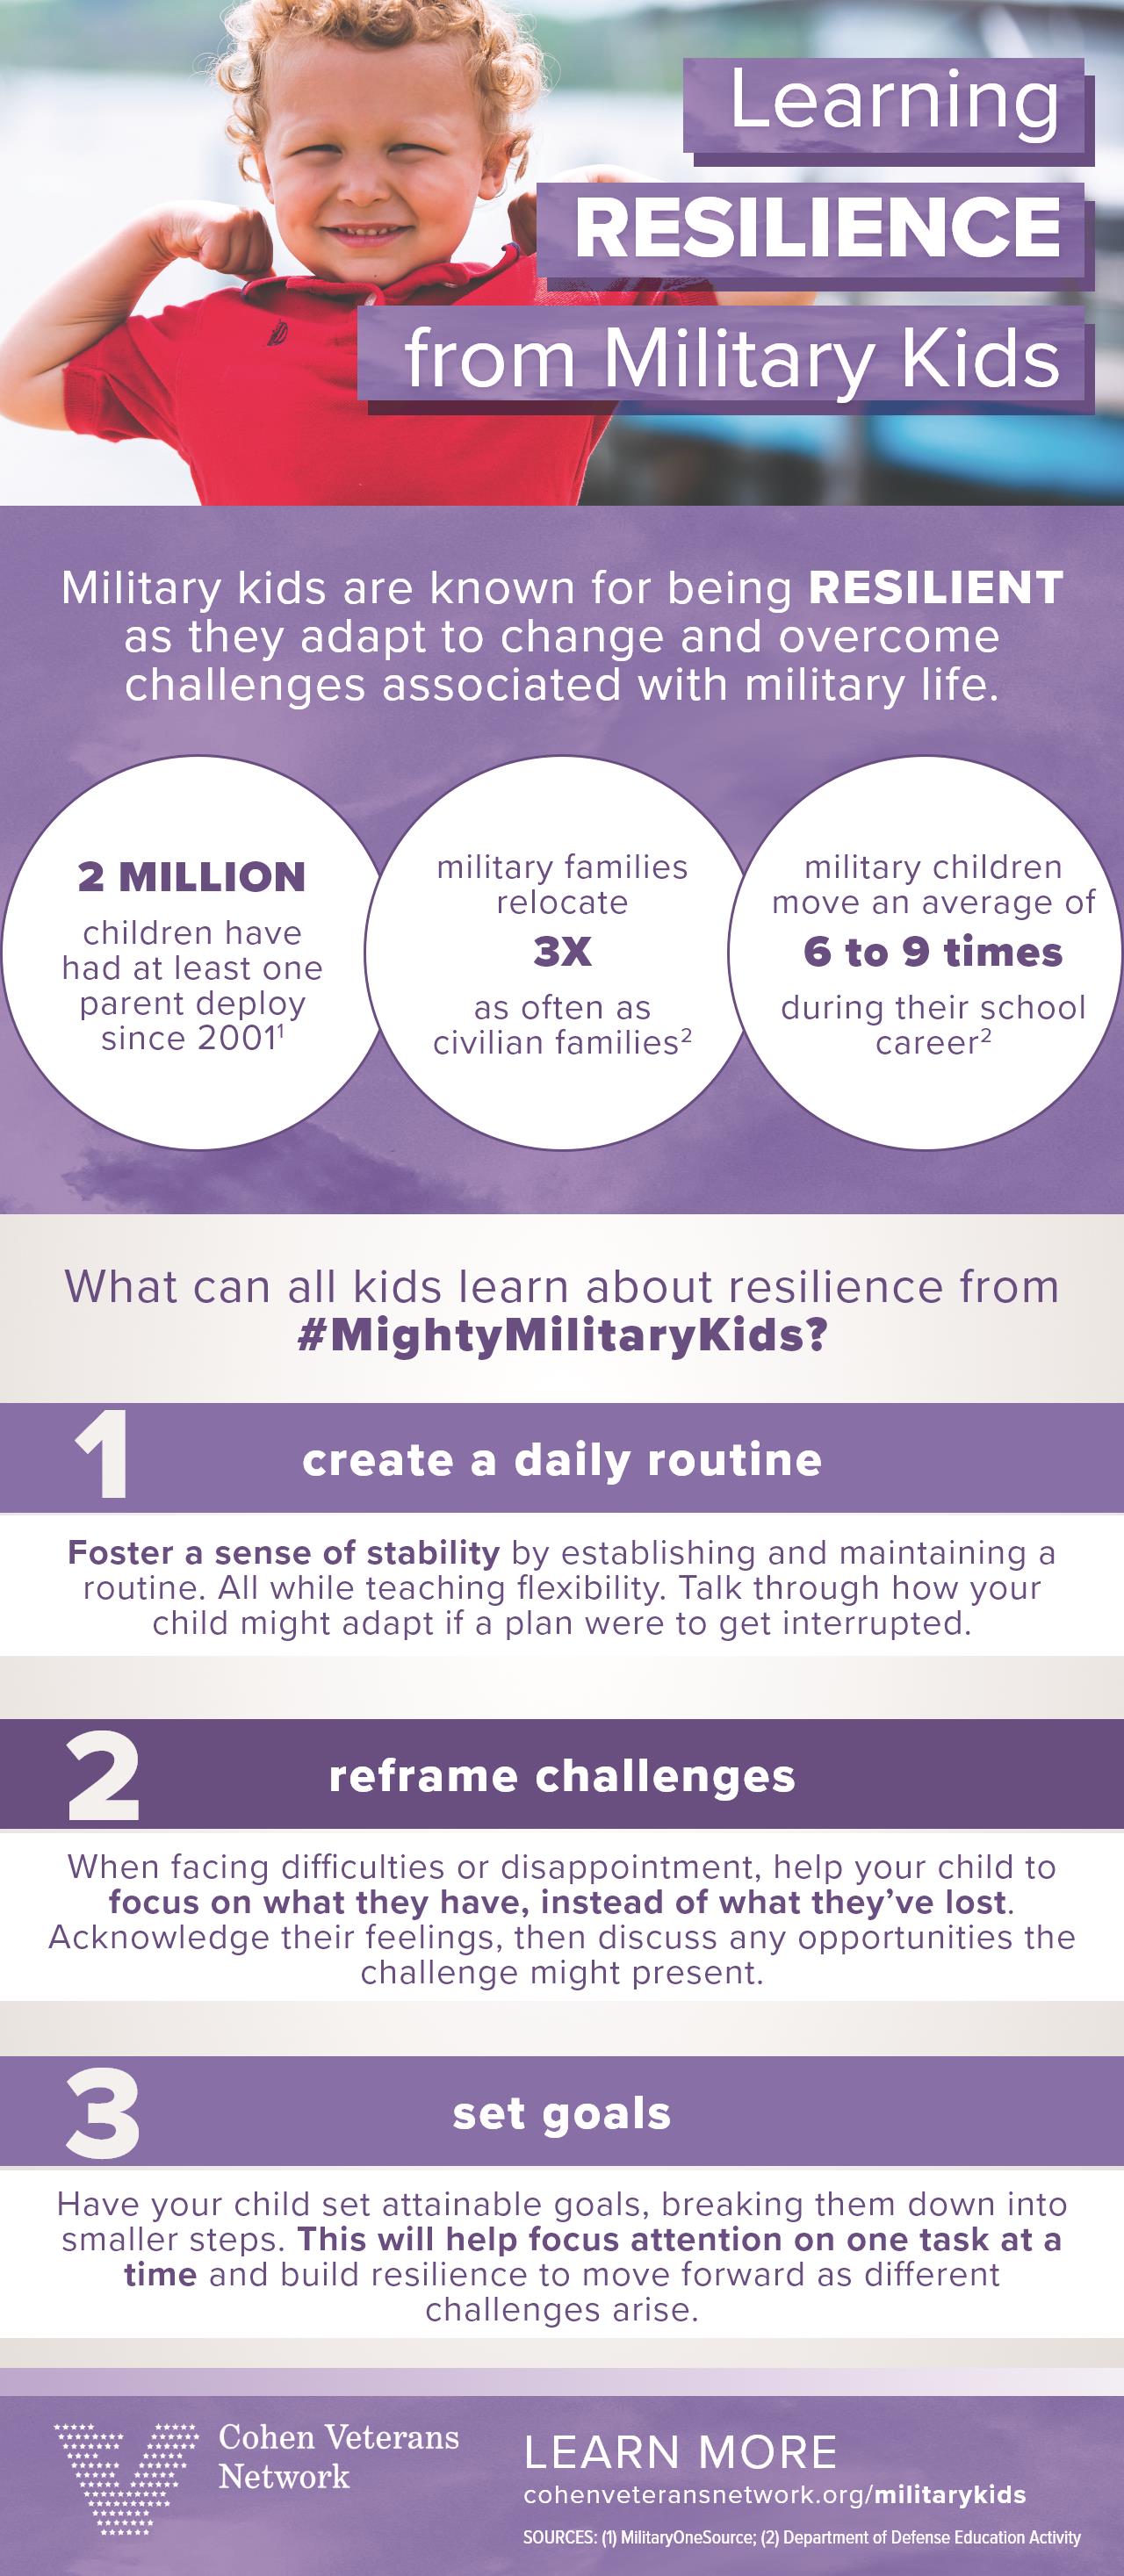 Learning Resilience from Military Kids